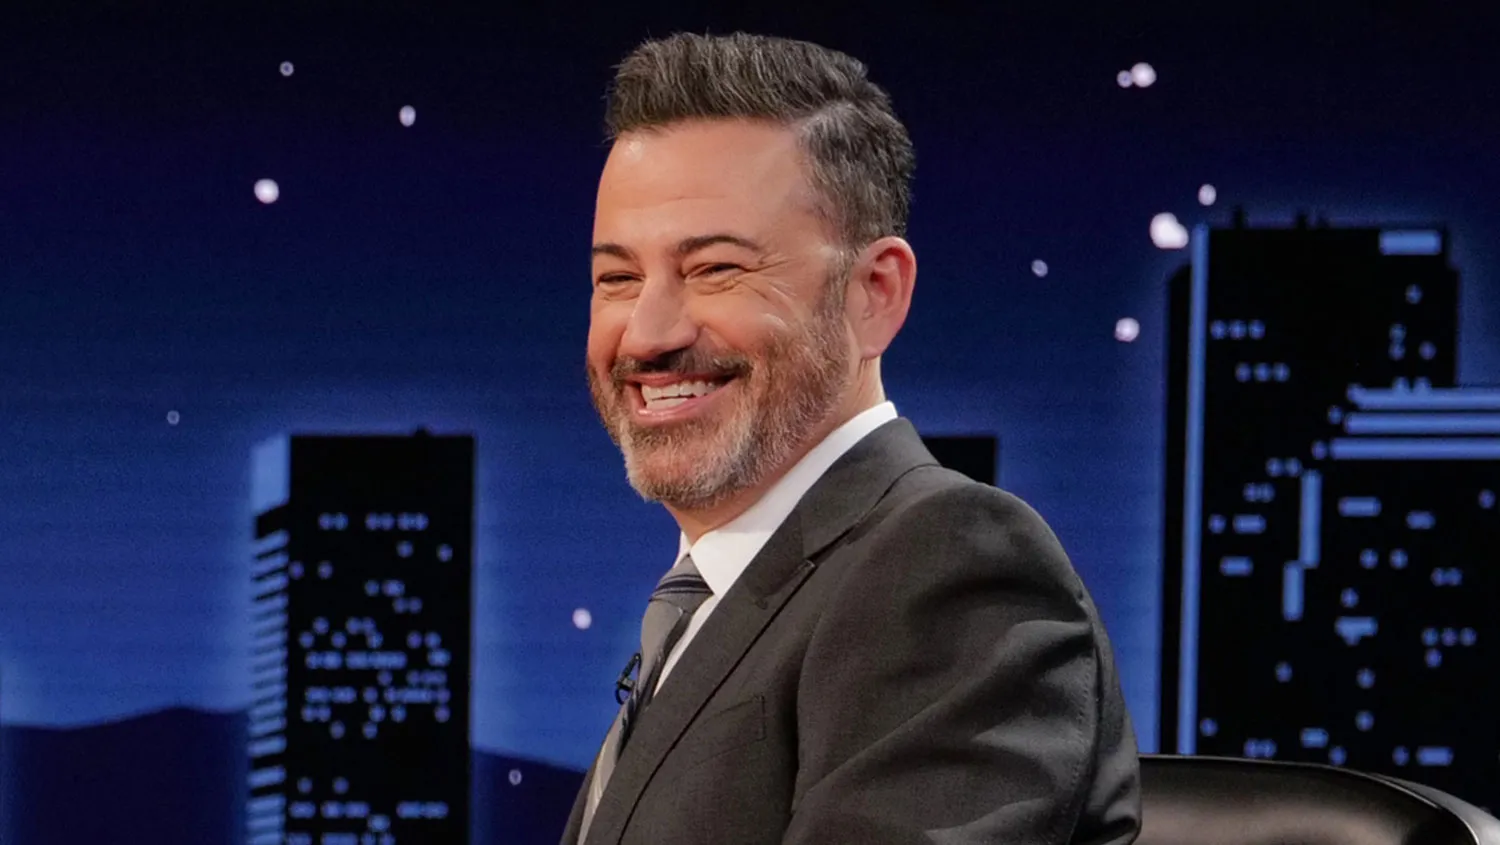 Jimmy Kimmel Slams Upcoming 'The Acolyte' Star Wars Series: Will It Overcome Fan Criticism?